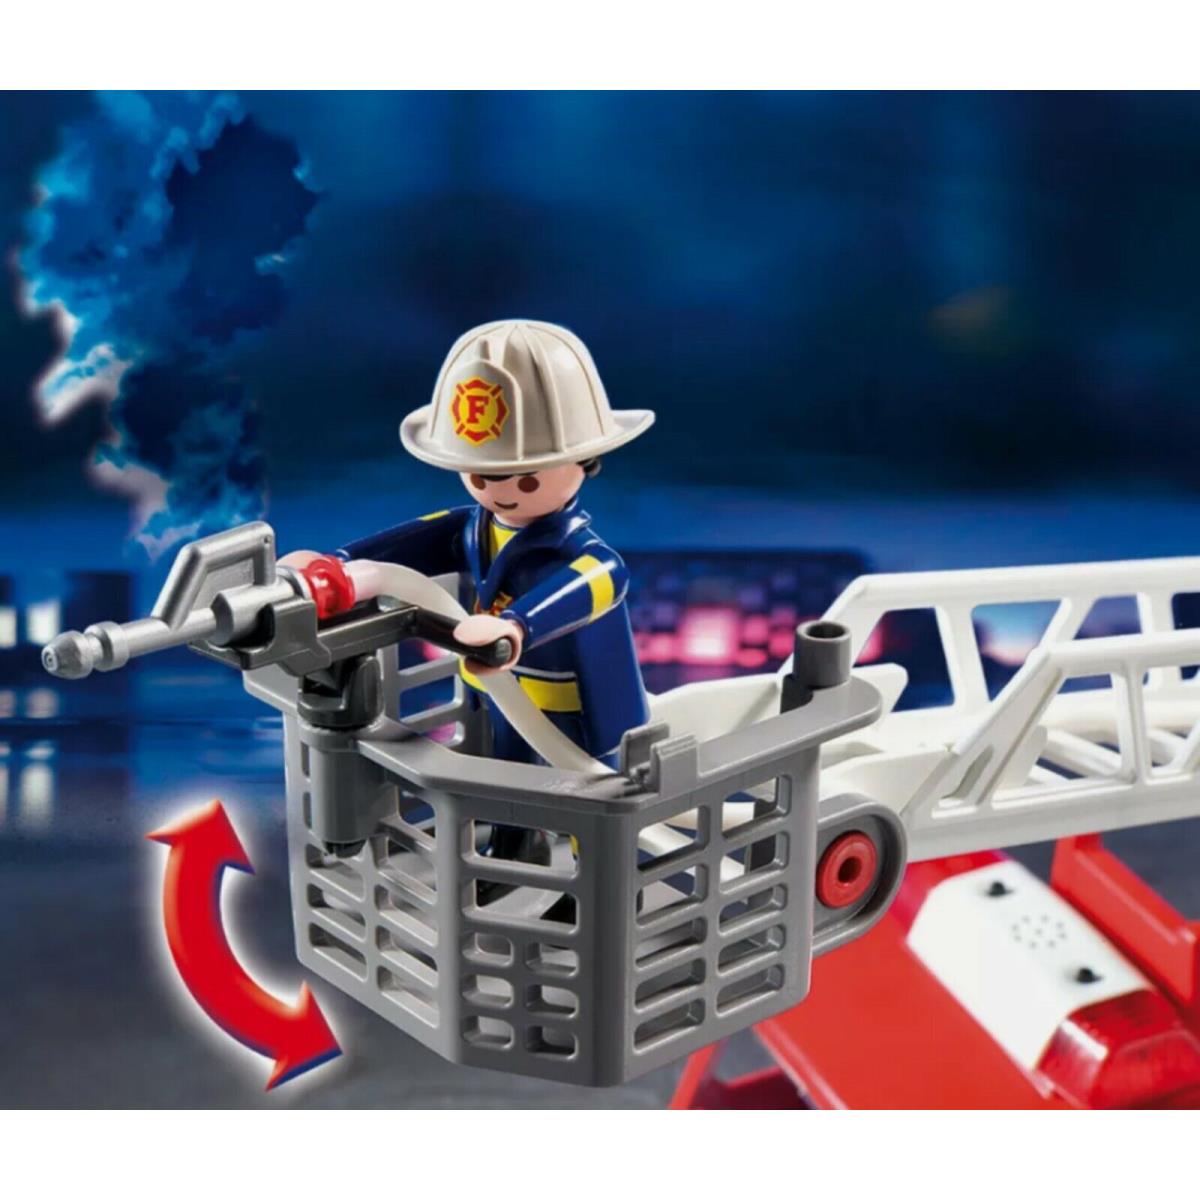 Playmobil City Action Rescue Ladder Unit Fire Truck 5682 with Lights Sounds